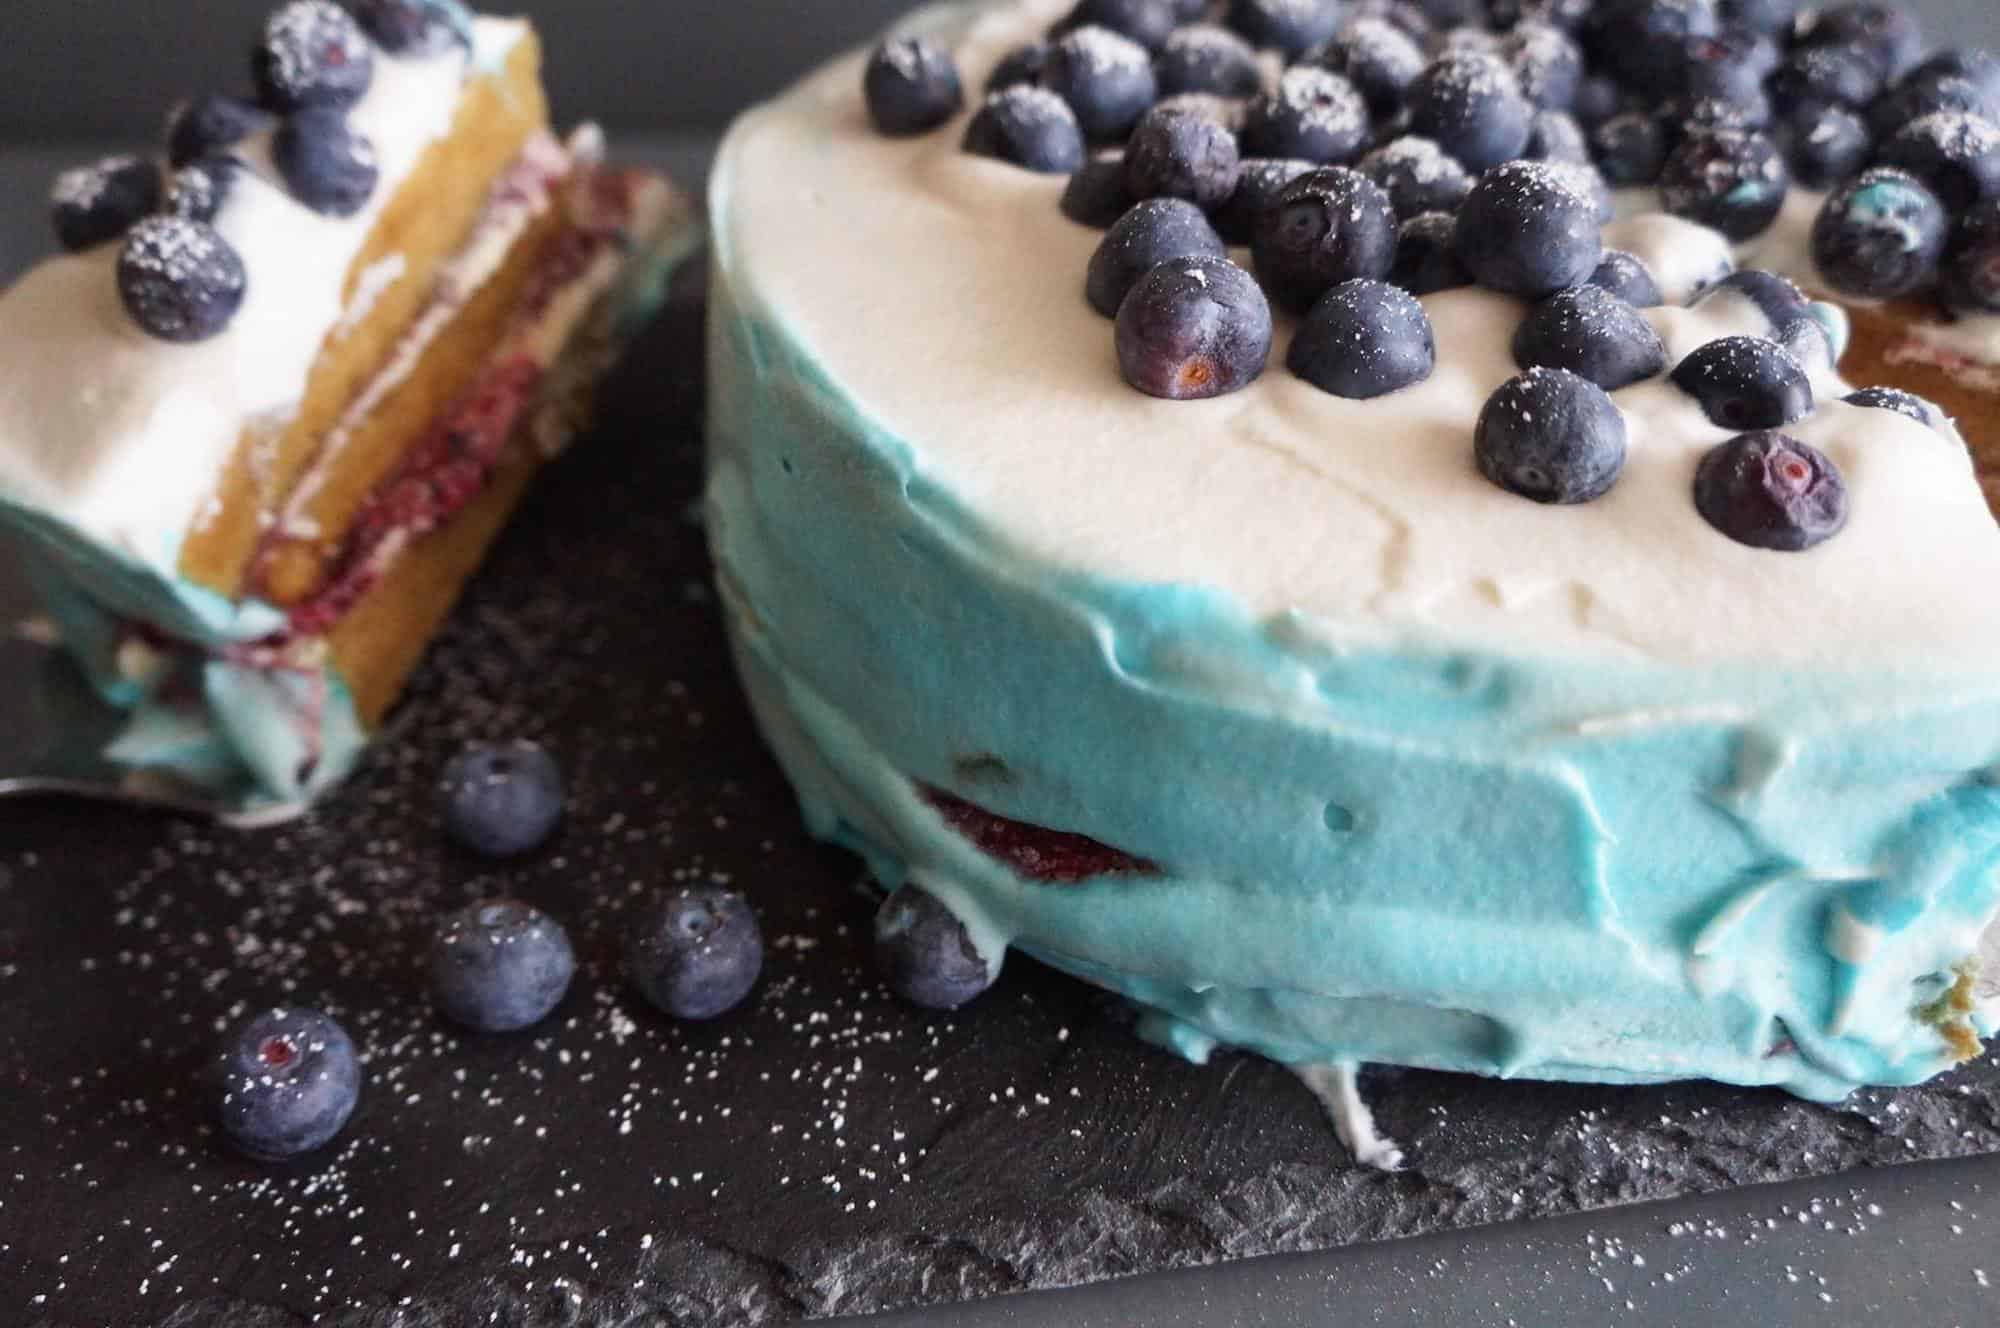 Top vegan and vegetarian places to eat in Paris, like Cloud Cakes and its delicious cakes with berries and natural blue icing.